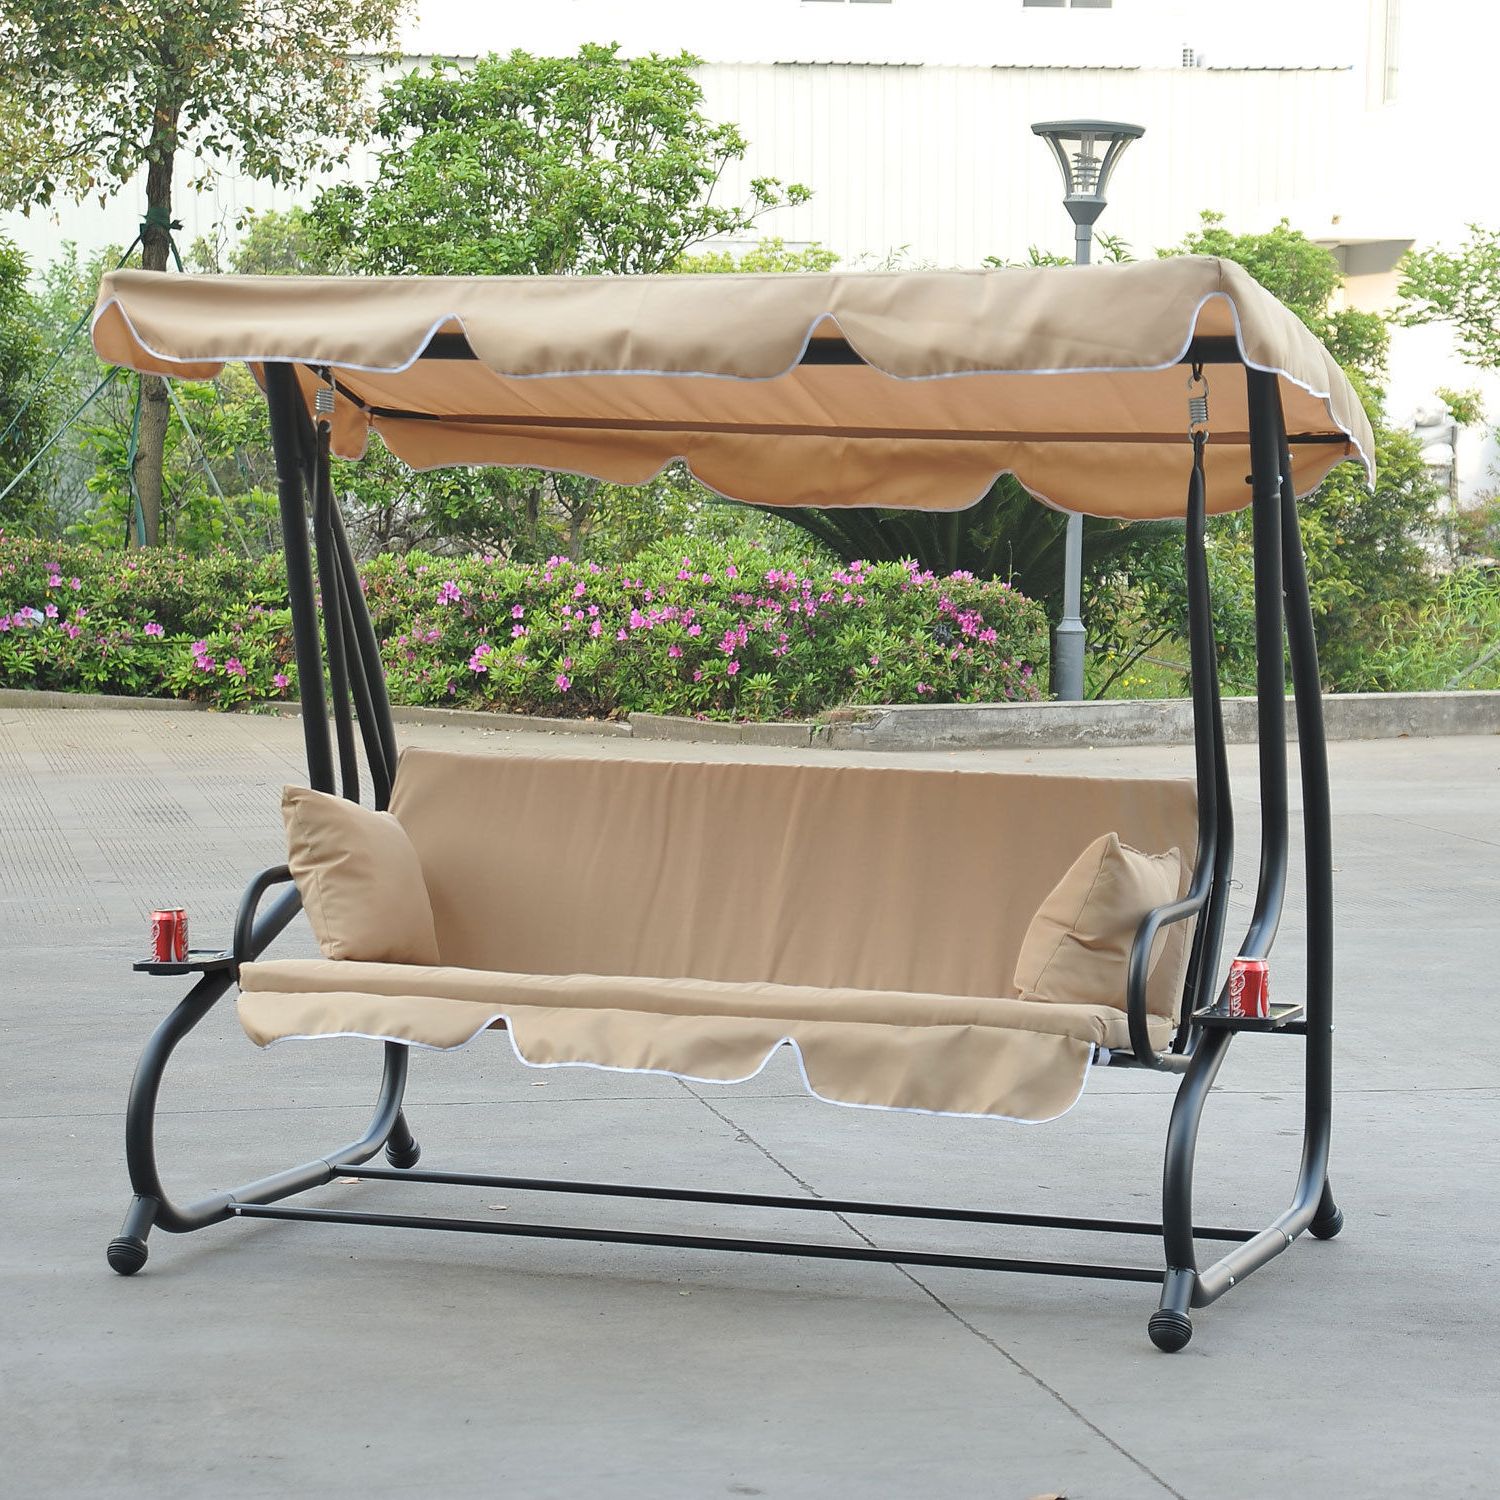 Most Recently Released Porch Swings With Canopy Inside Details About Outdoor 3 Person Patio Porch Swing Hammock Bench Canopy  Loveseat Convertible Bed (View 15 of 25)